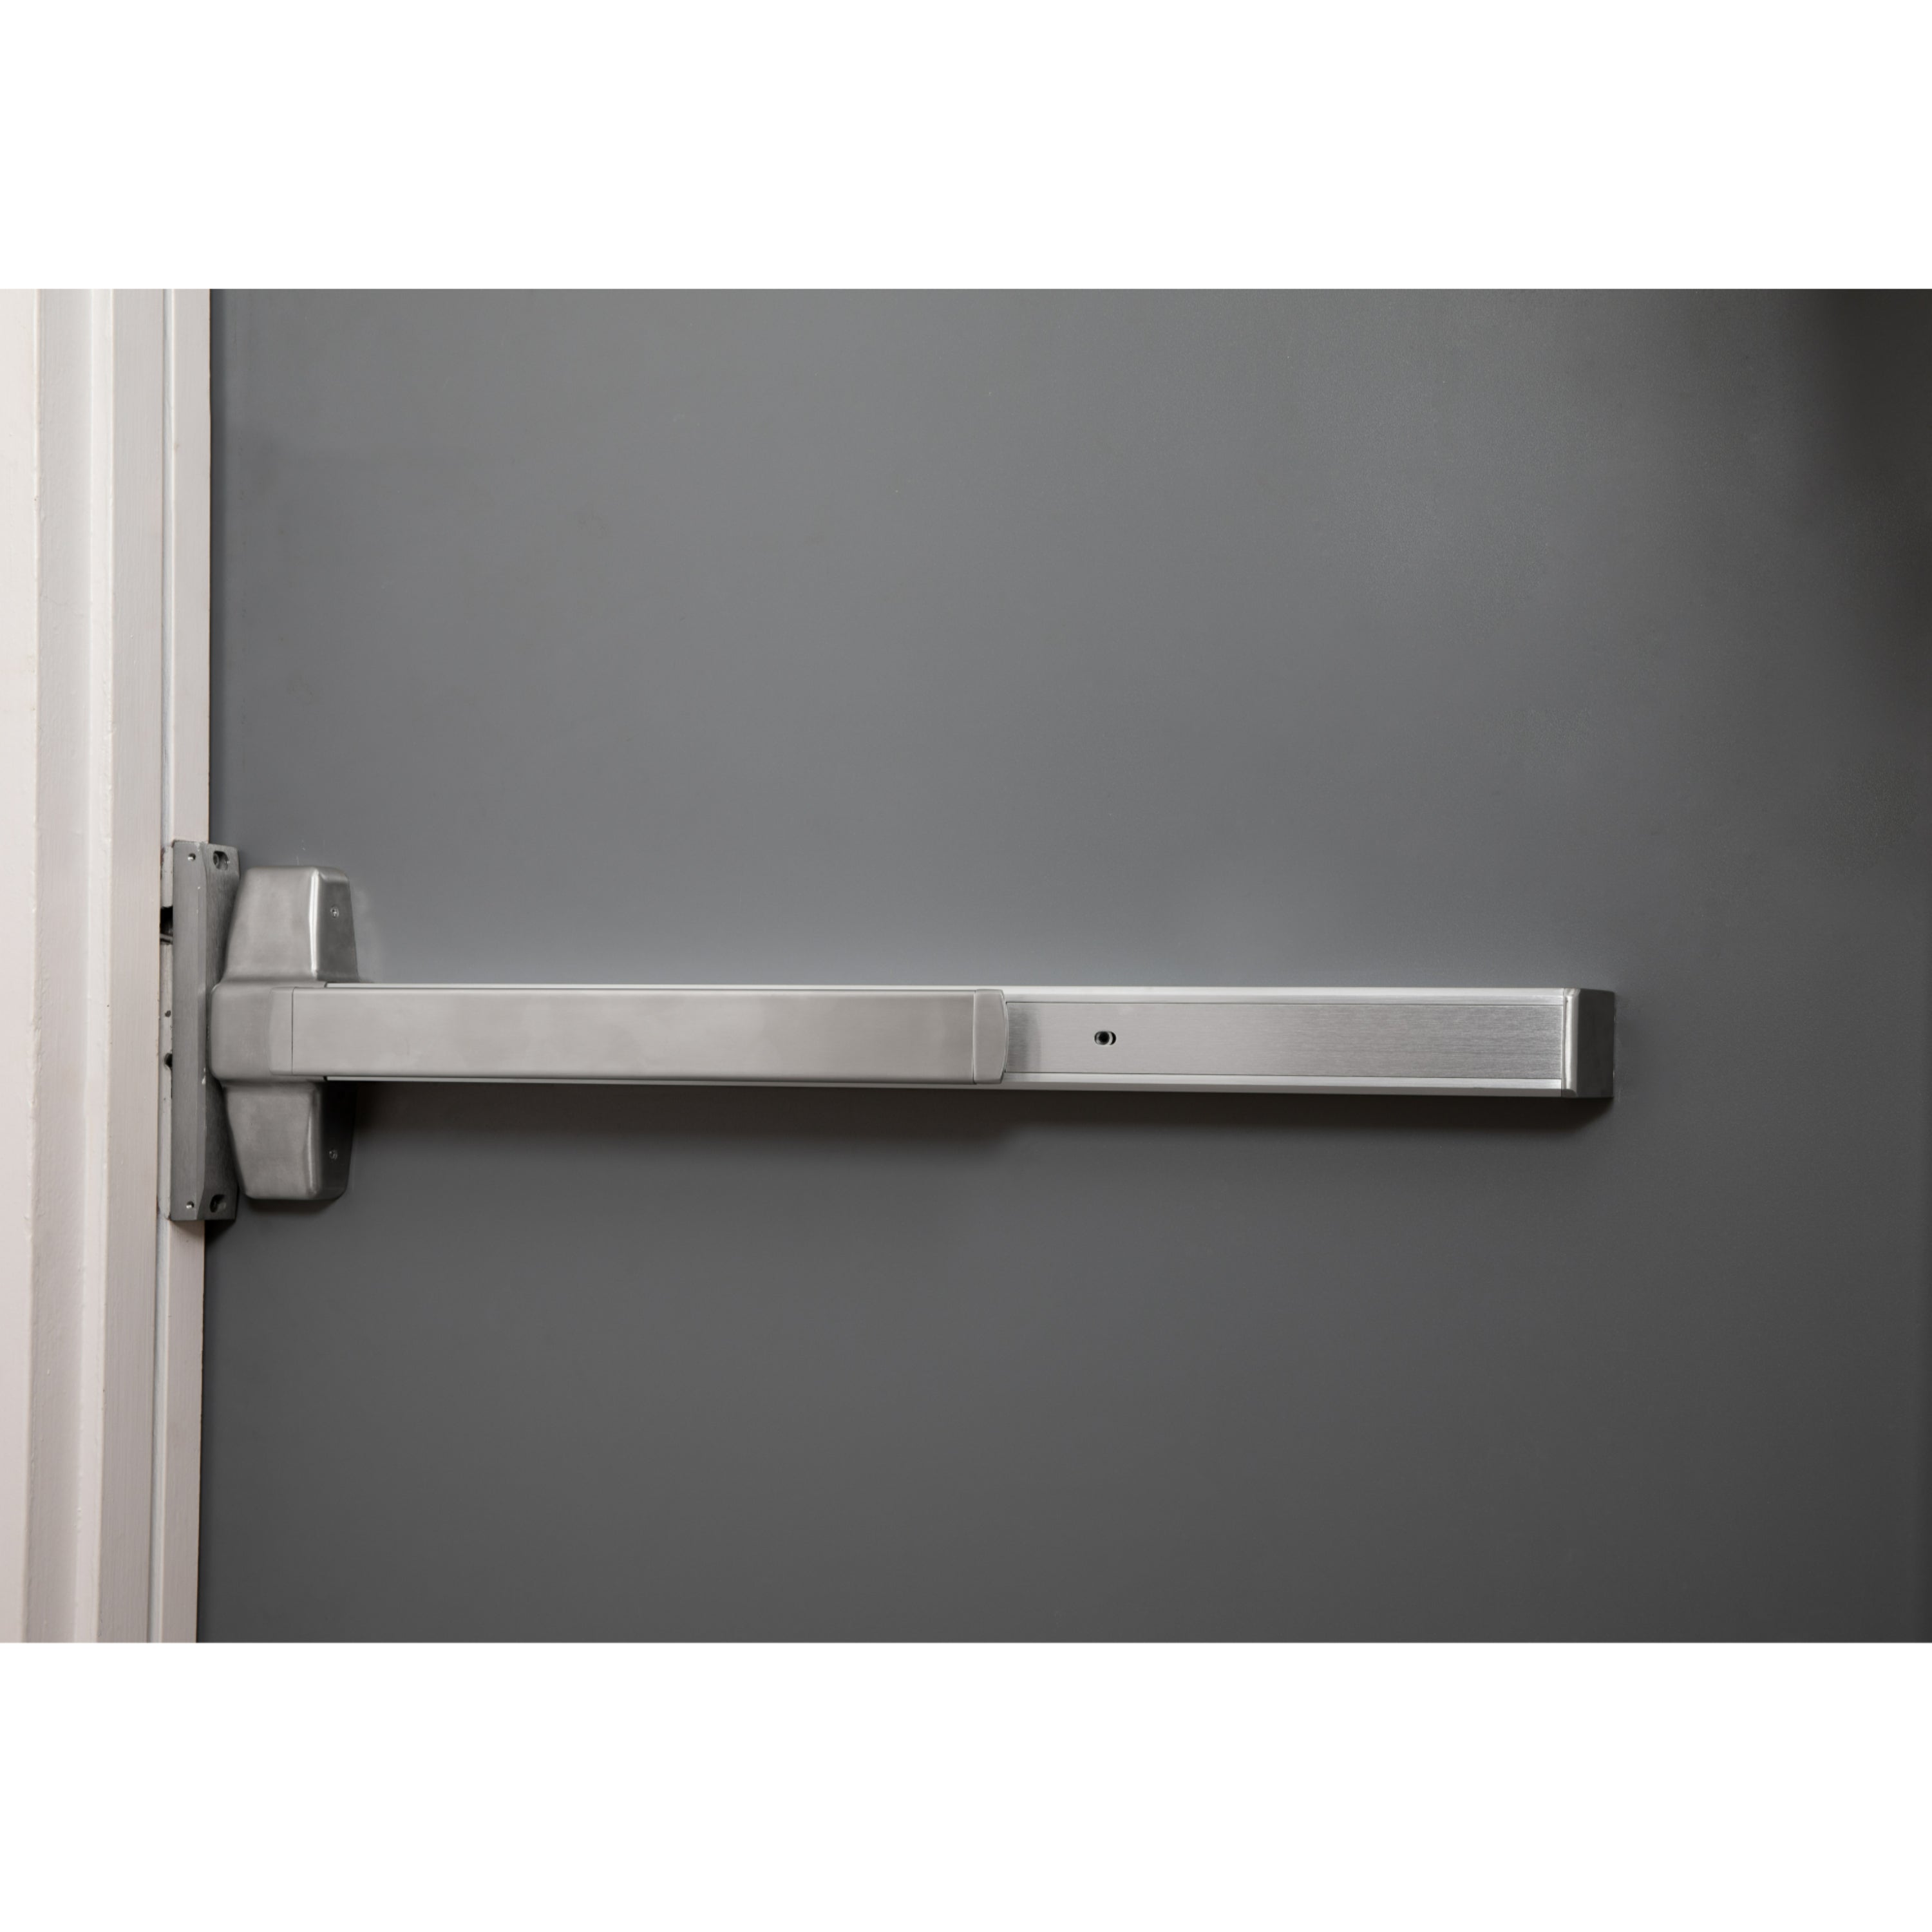 900 Series UL Listed Aluminum 36 in Grade 1 Heavy Duty Panic Rim Surface Exit Device -  Pro-Edge HD